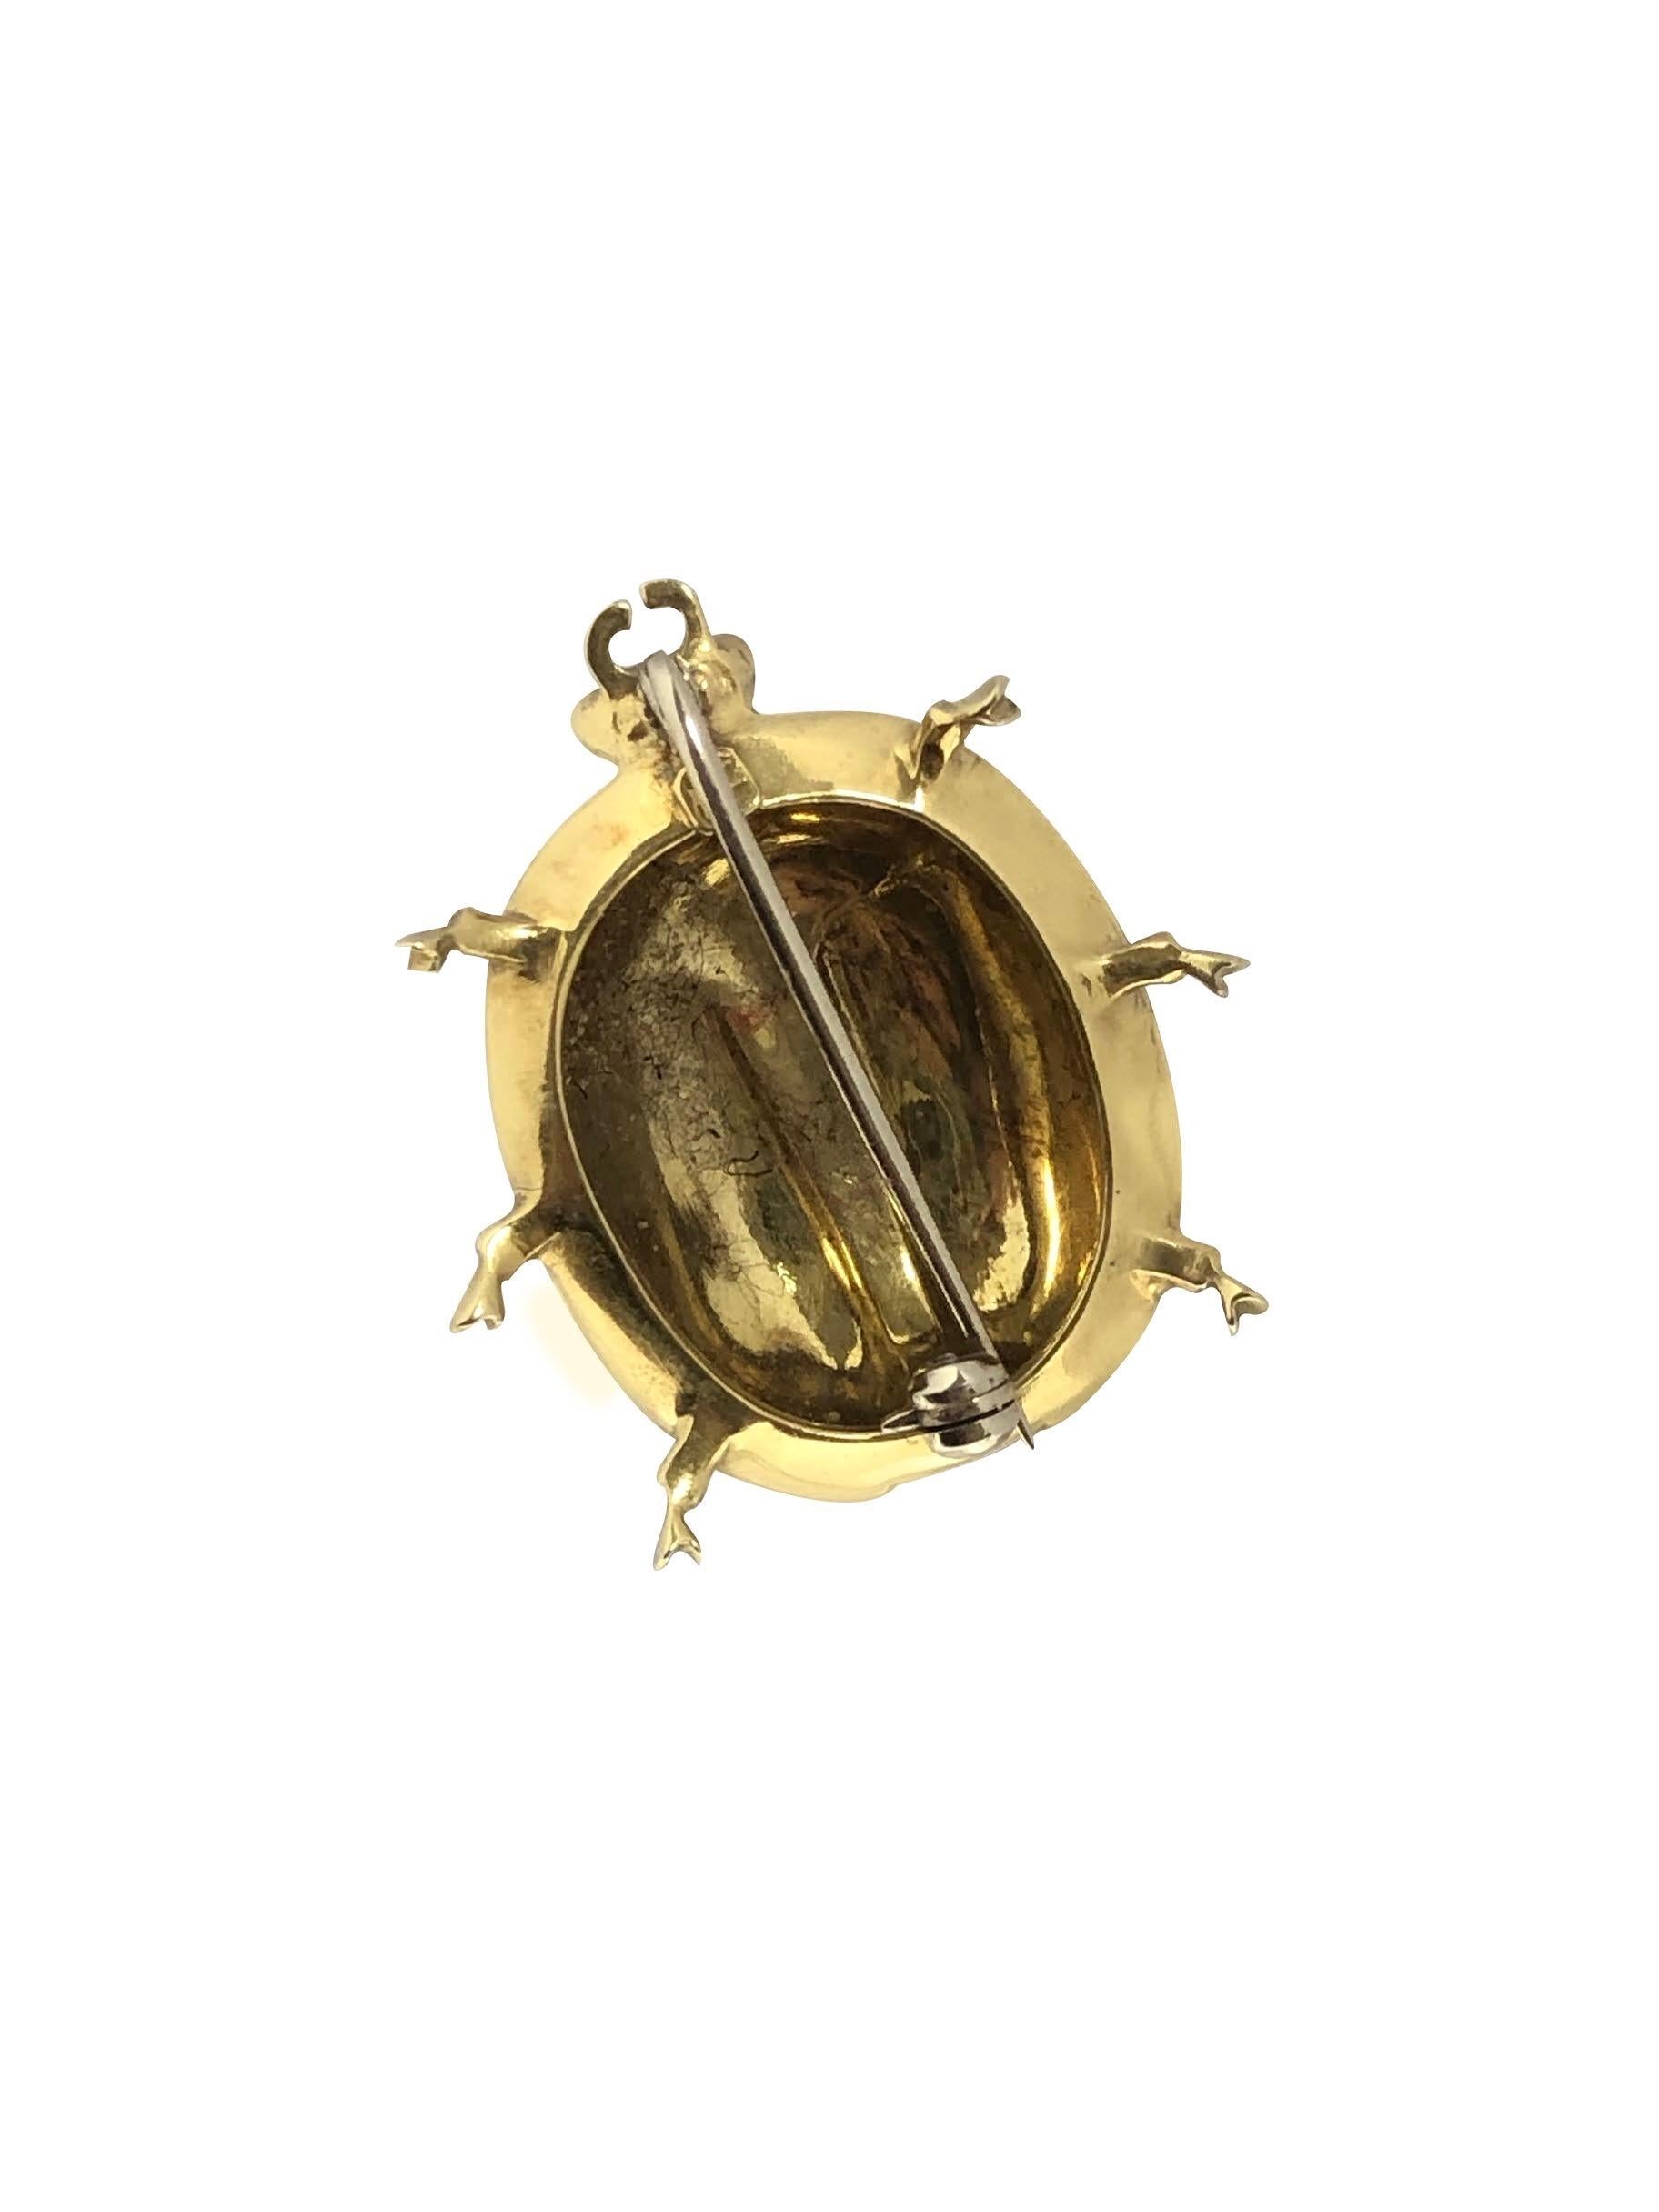 Circa 1990 Lady Bug Brooch, 18K Yellow Gold and exquisitely detailed in Red White and Black Guilloch Enamel. Measuring 1 1/4 X 1 inch and weighing 14.7 Grams.   